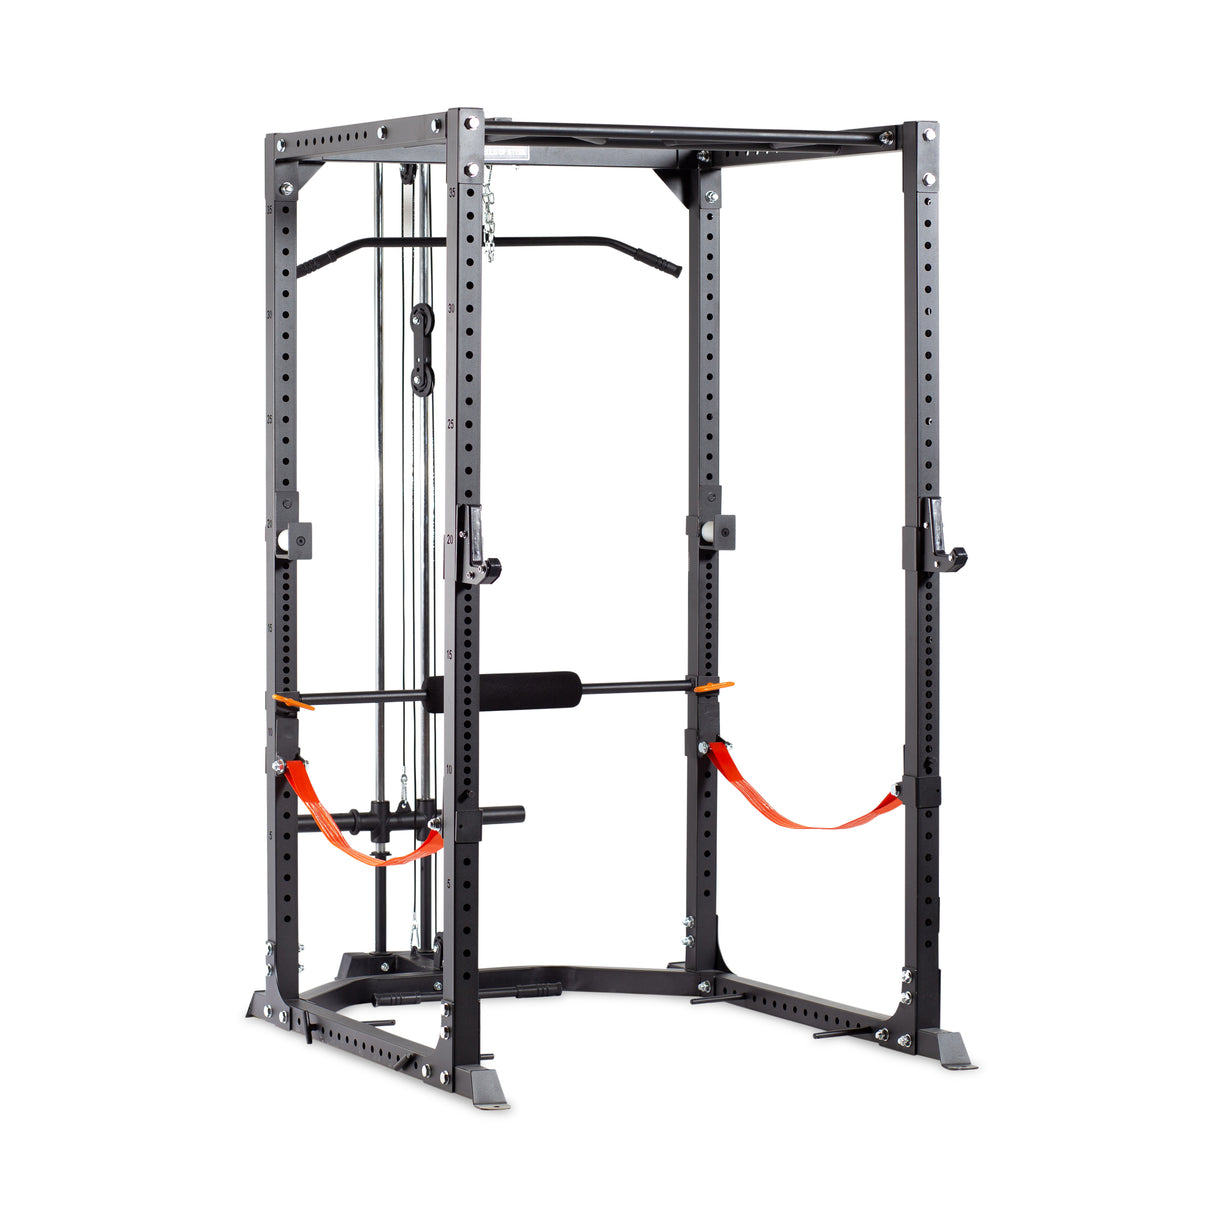 Residential Power Rack 4.1 for home fitness use. 